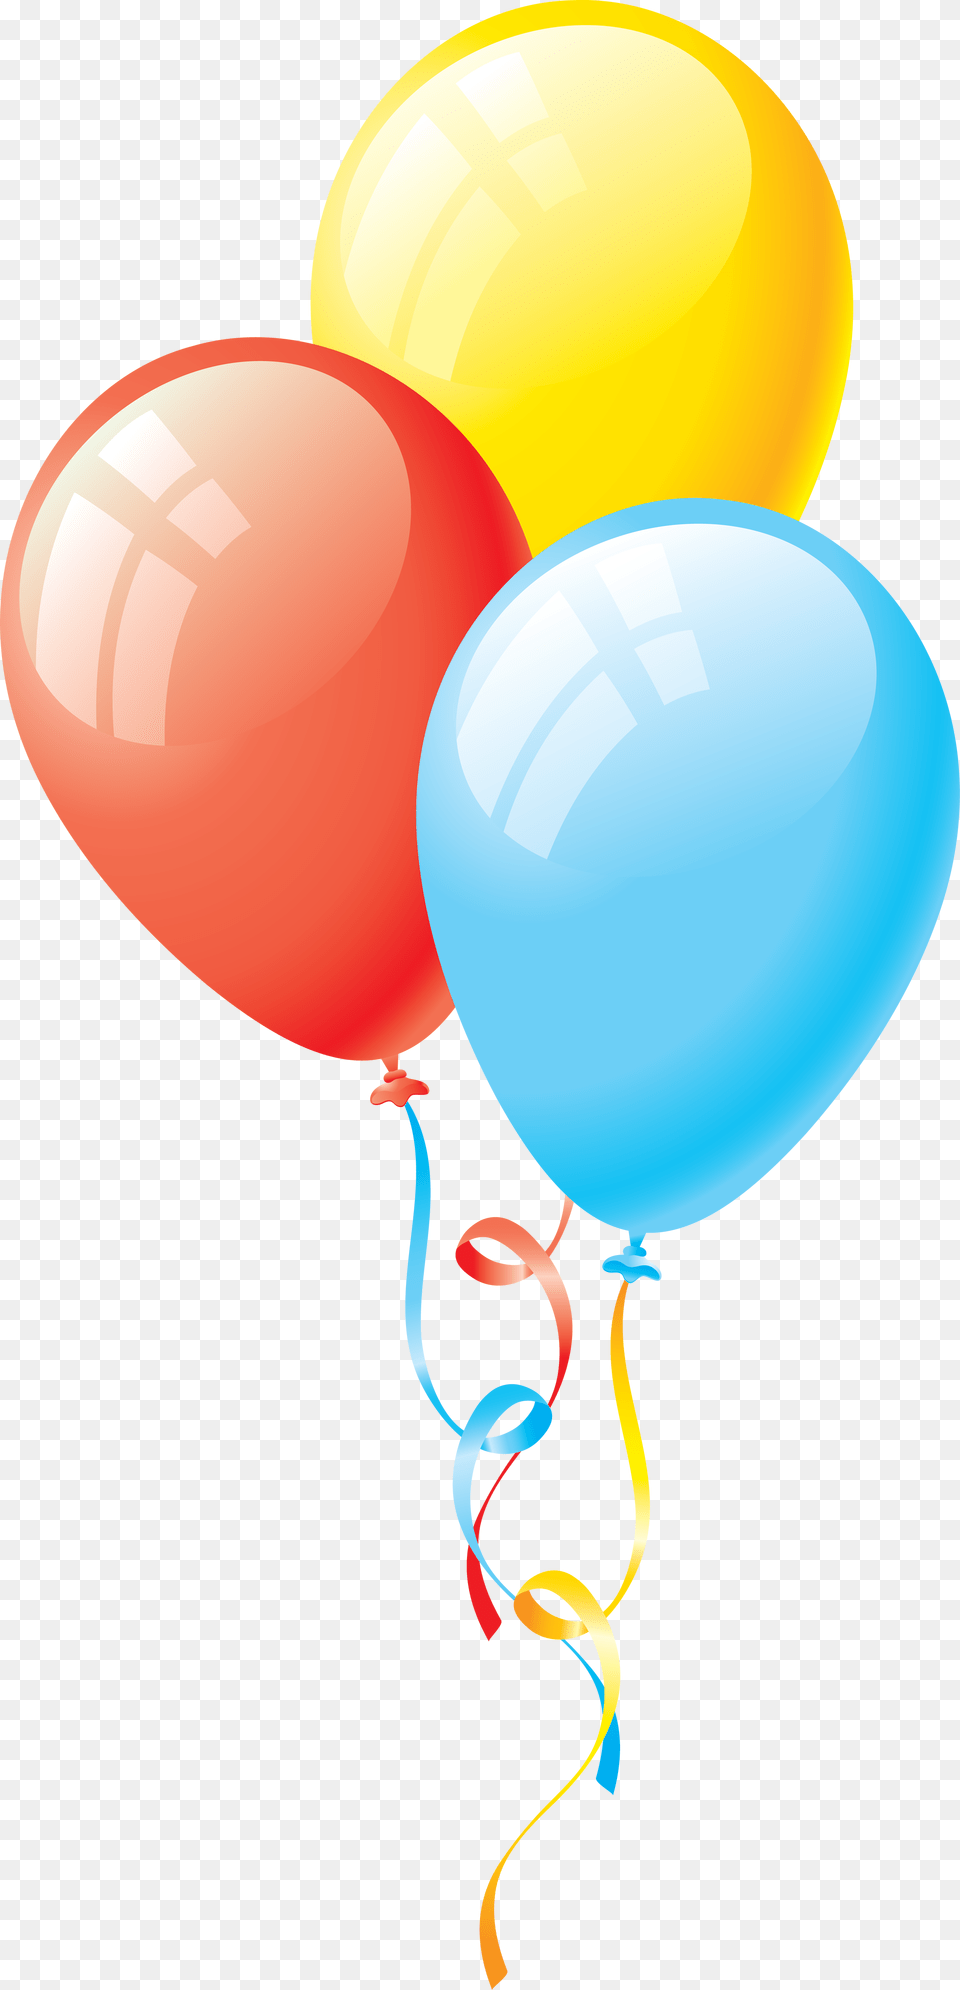 Party Ribbons Background Balloons, Balloon Png Image